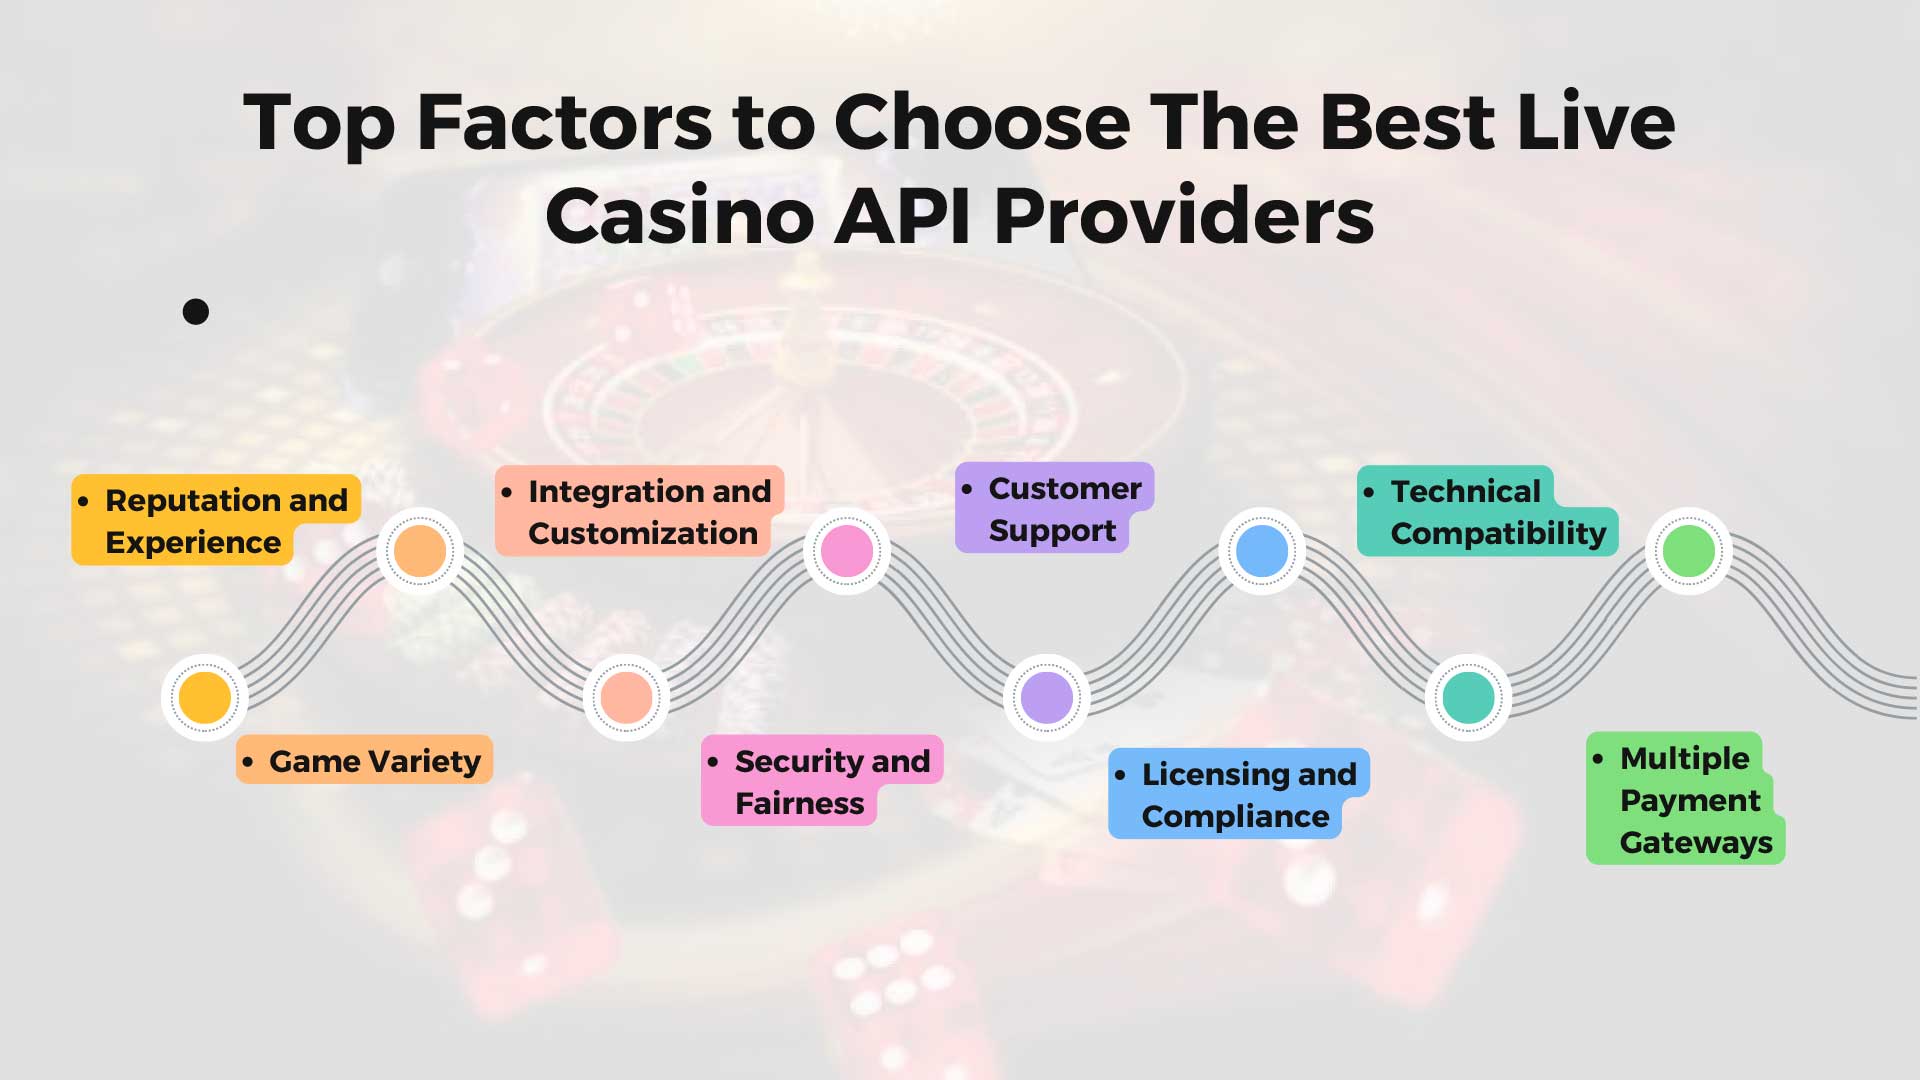 Top Factors to Choose The Best Live Casino API Providers